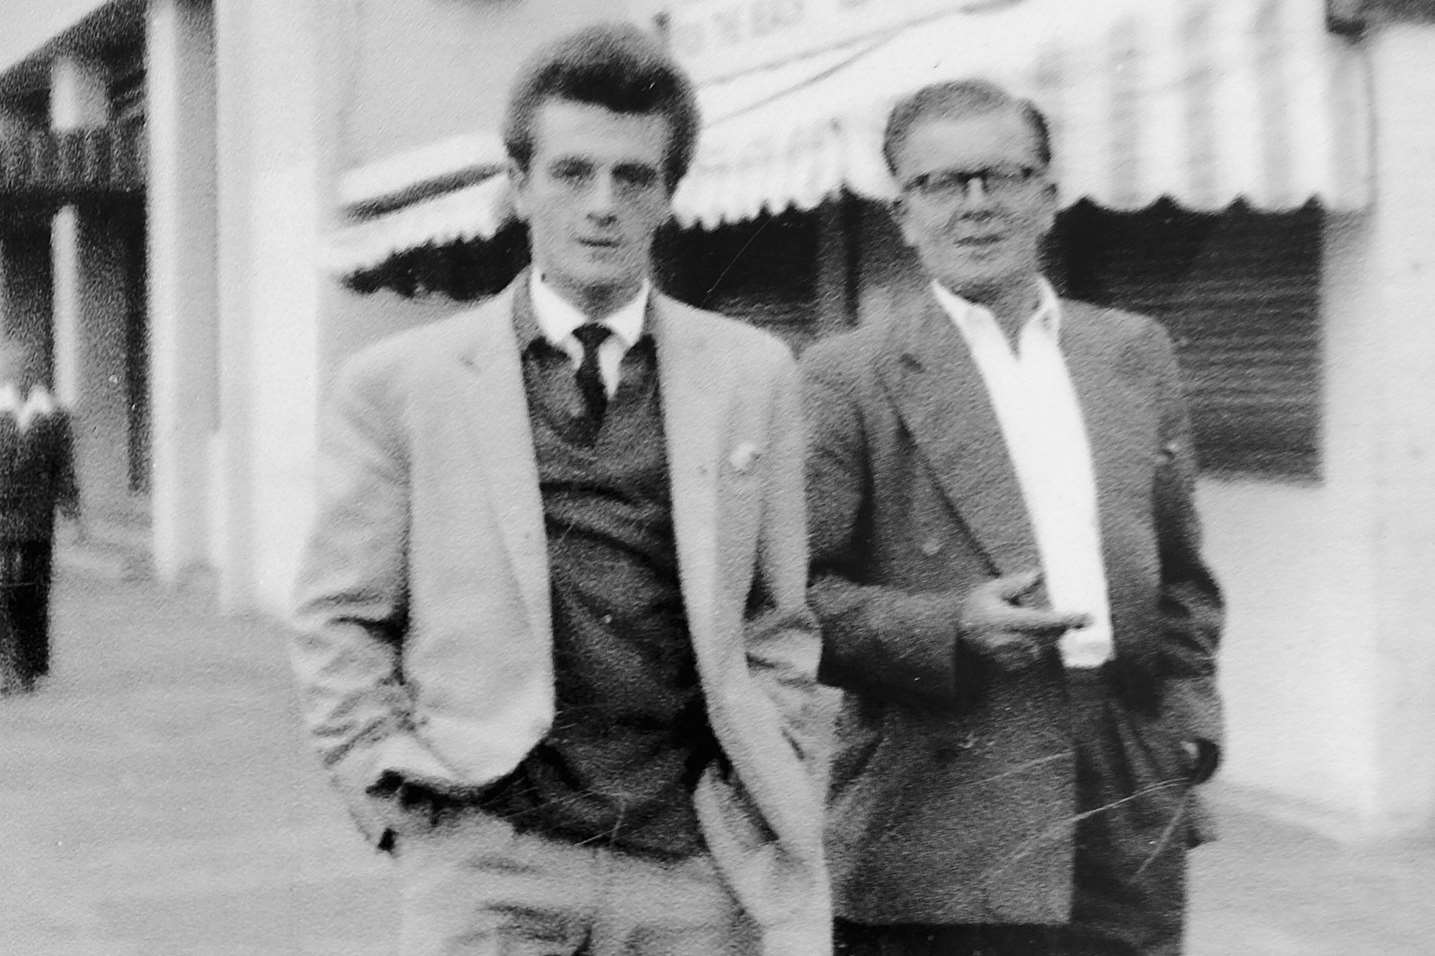 Ivor Thomas Jr and Snr on Ramsgate seafront in 1964